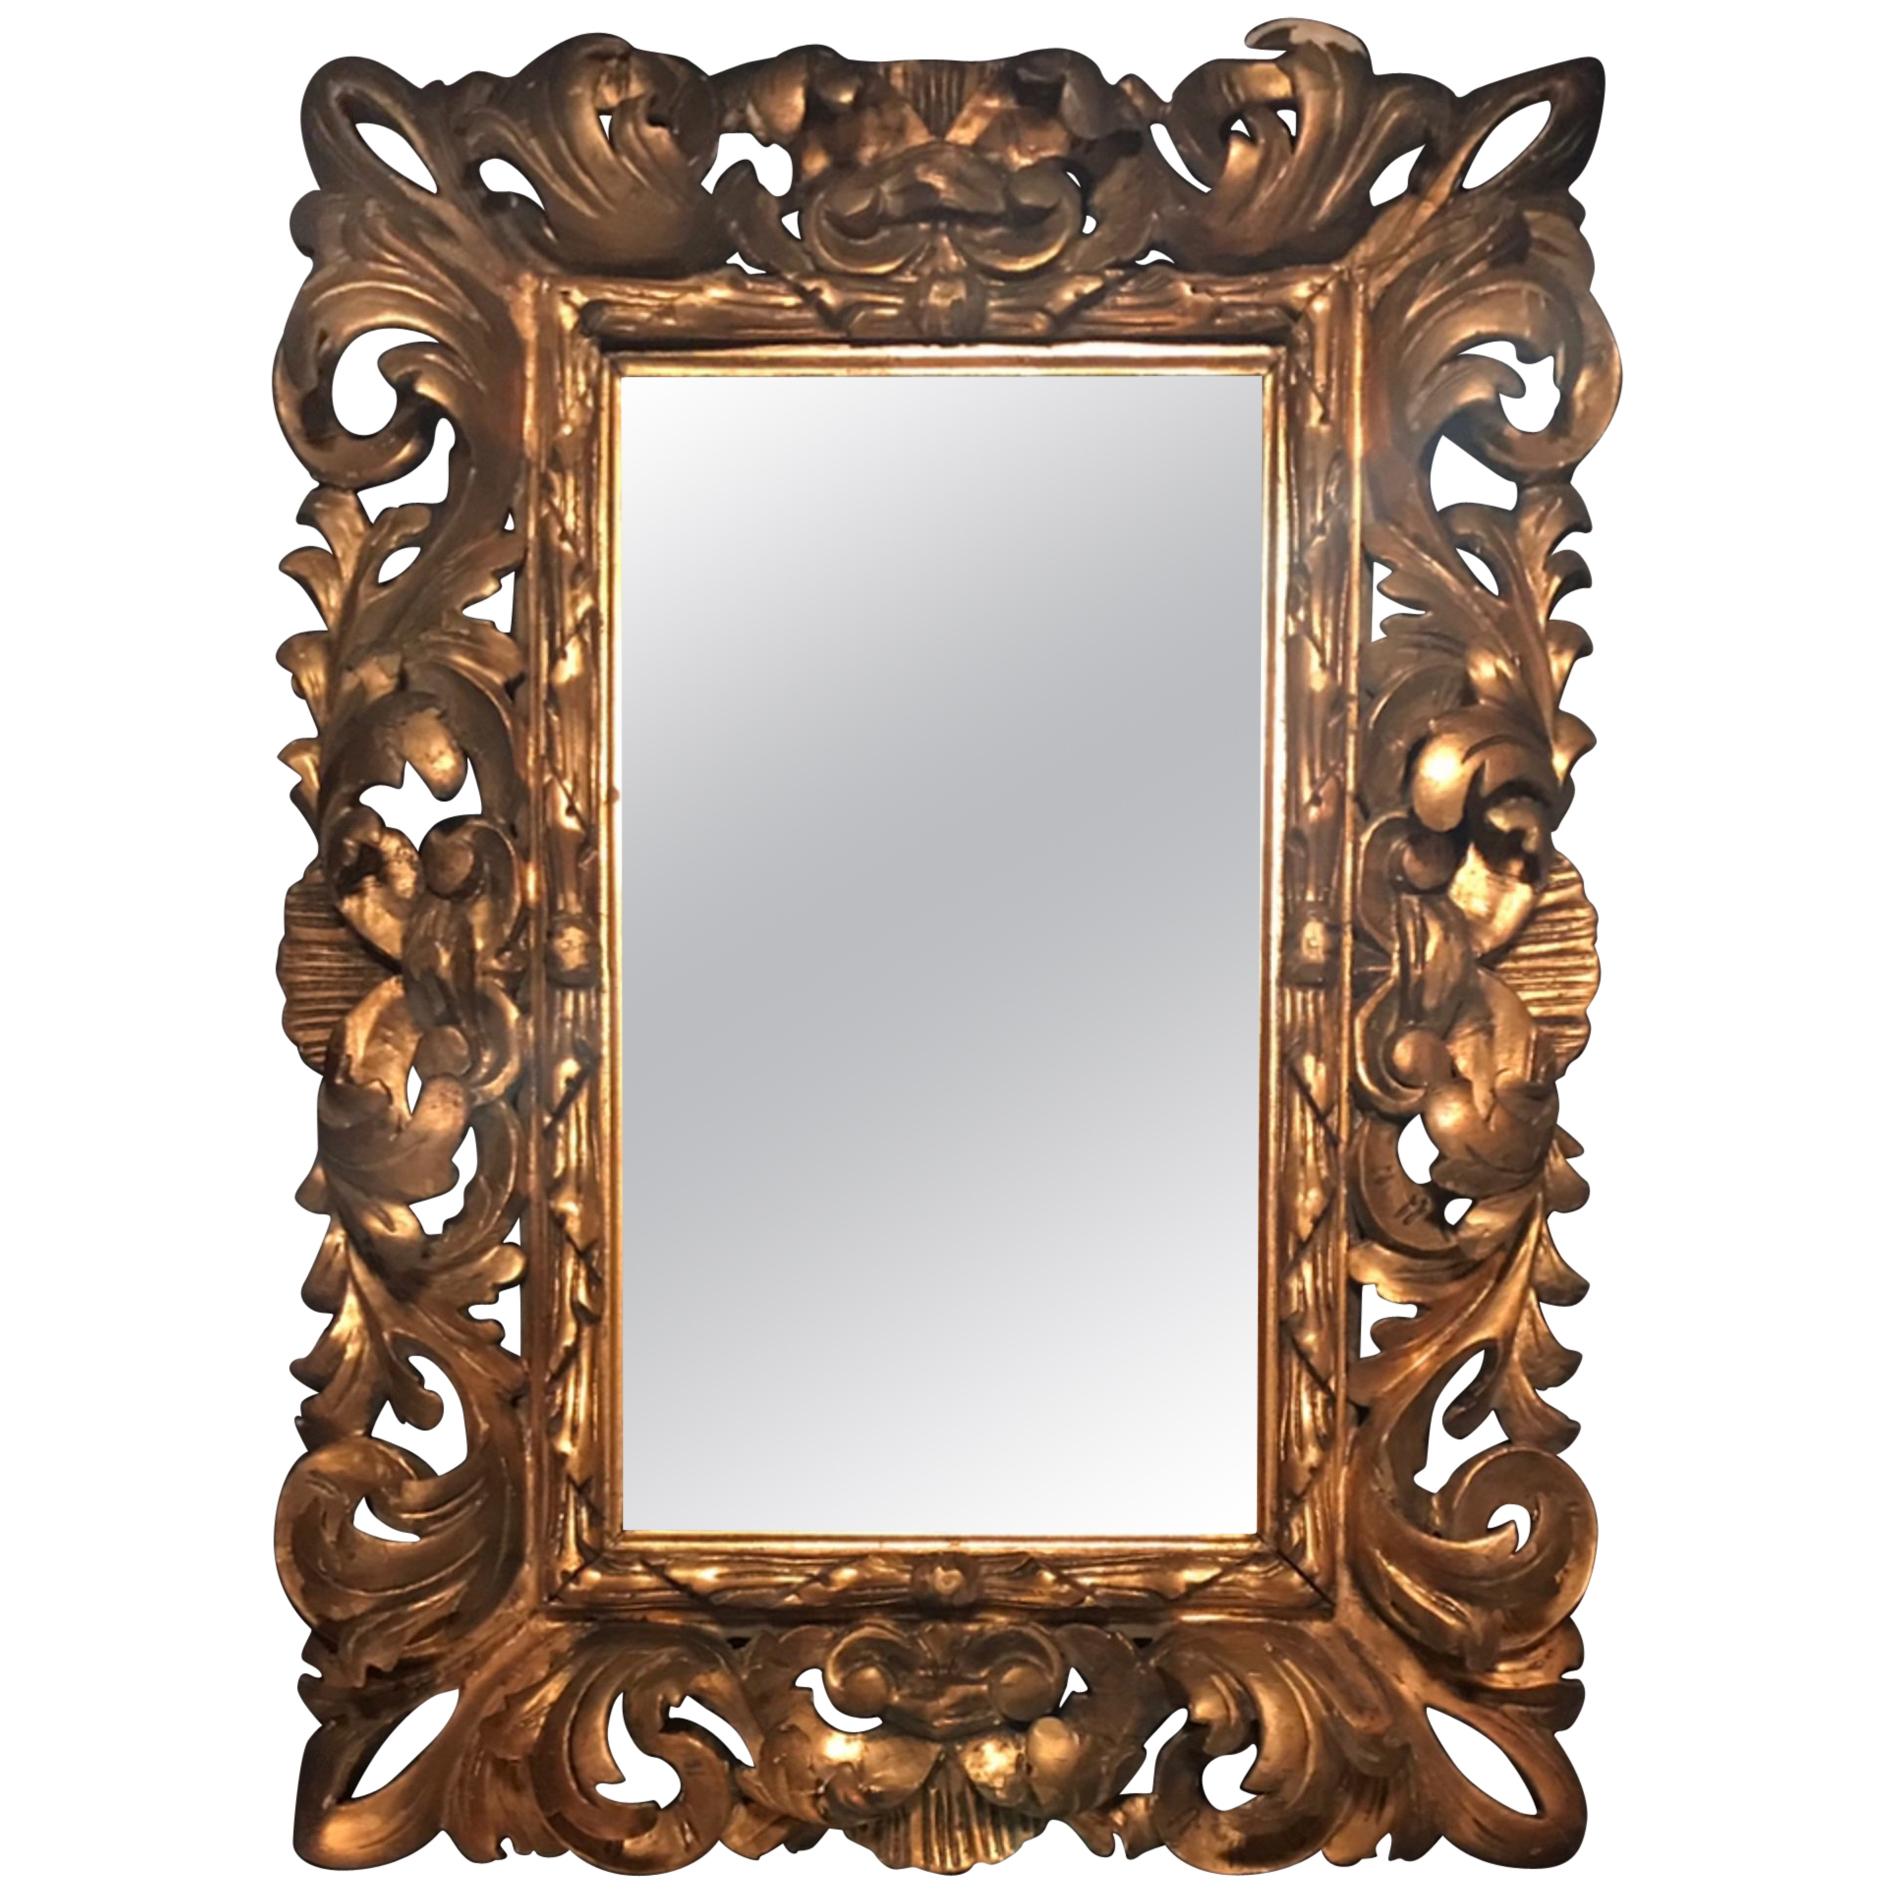 19th Century Florentine Baroque Style Giltwood Hand Carved Mirror Frame